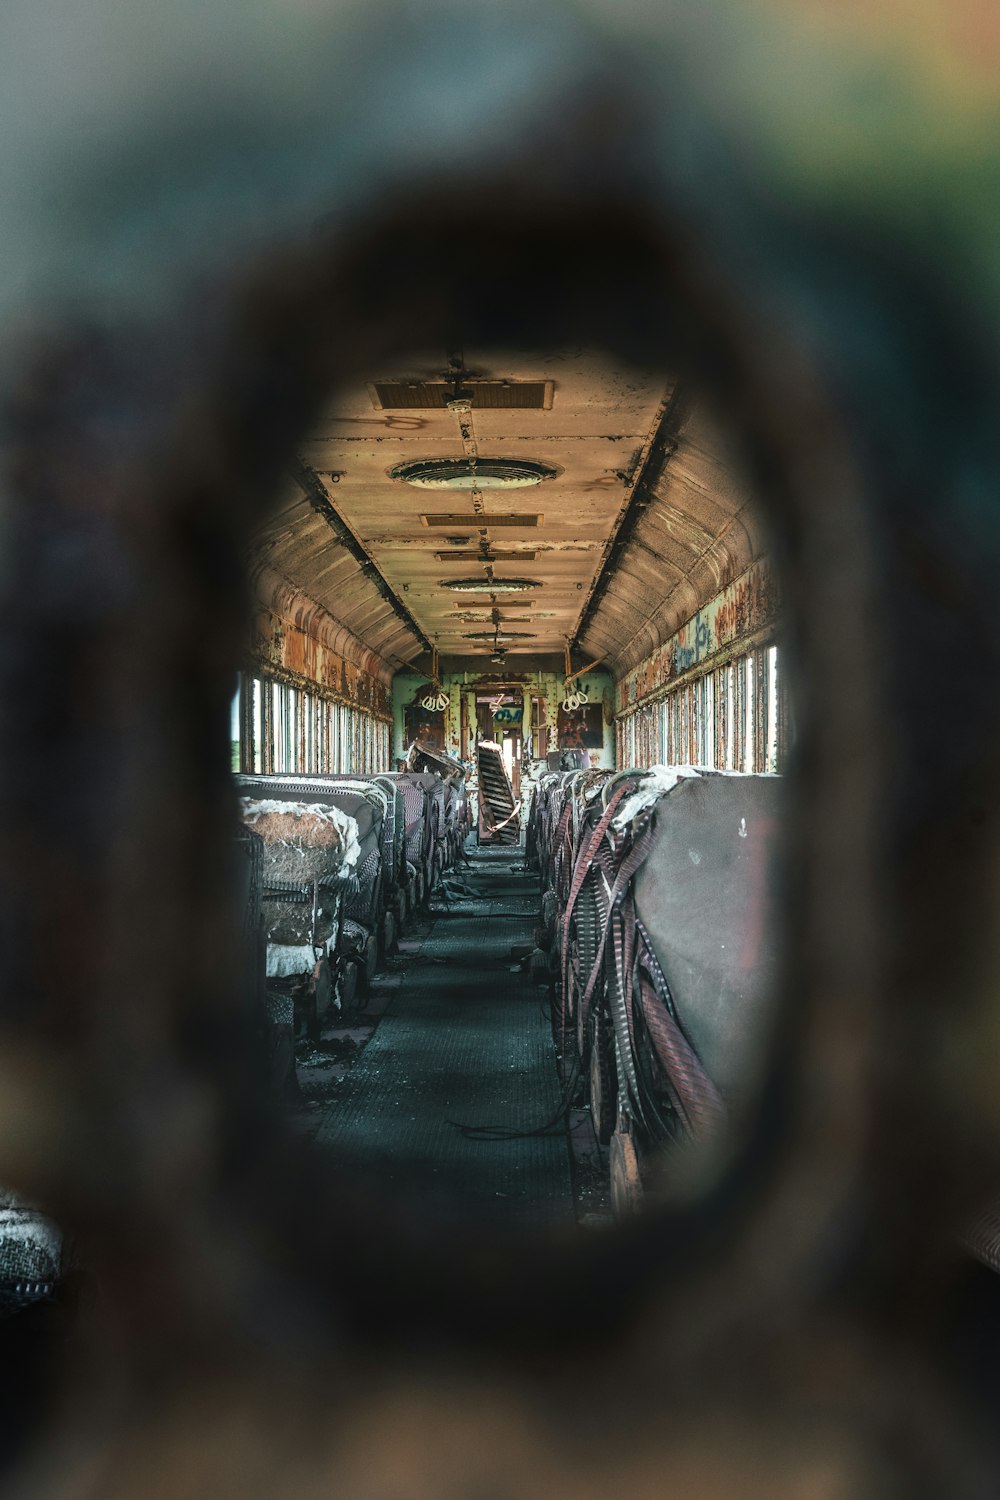 a view of a bus through a hole in the side of the bus